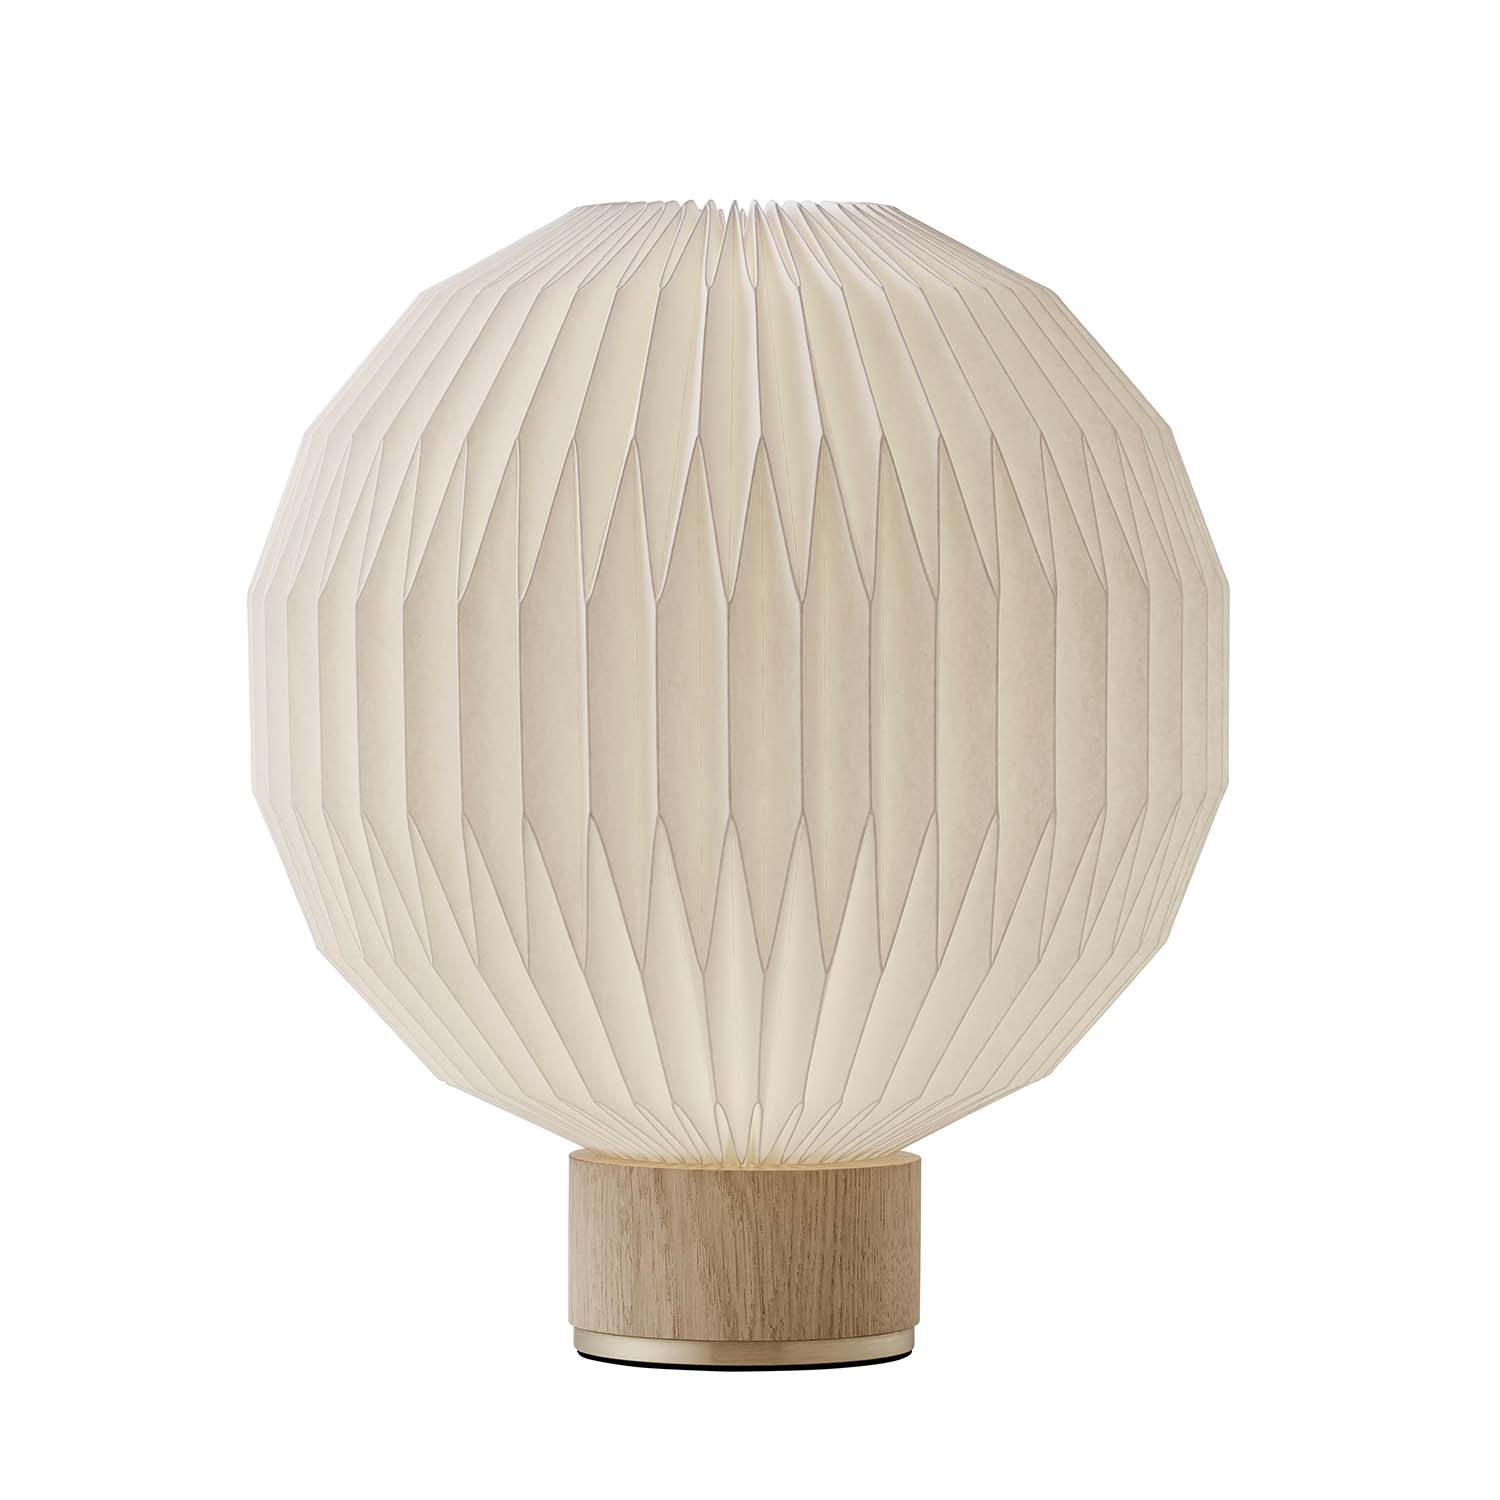 MODEL 375 - Handcrafted wood and white pleated paper table lamp